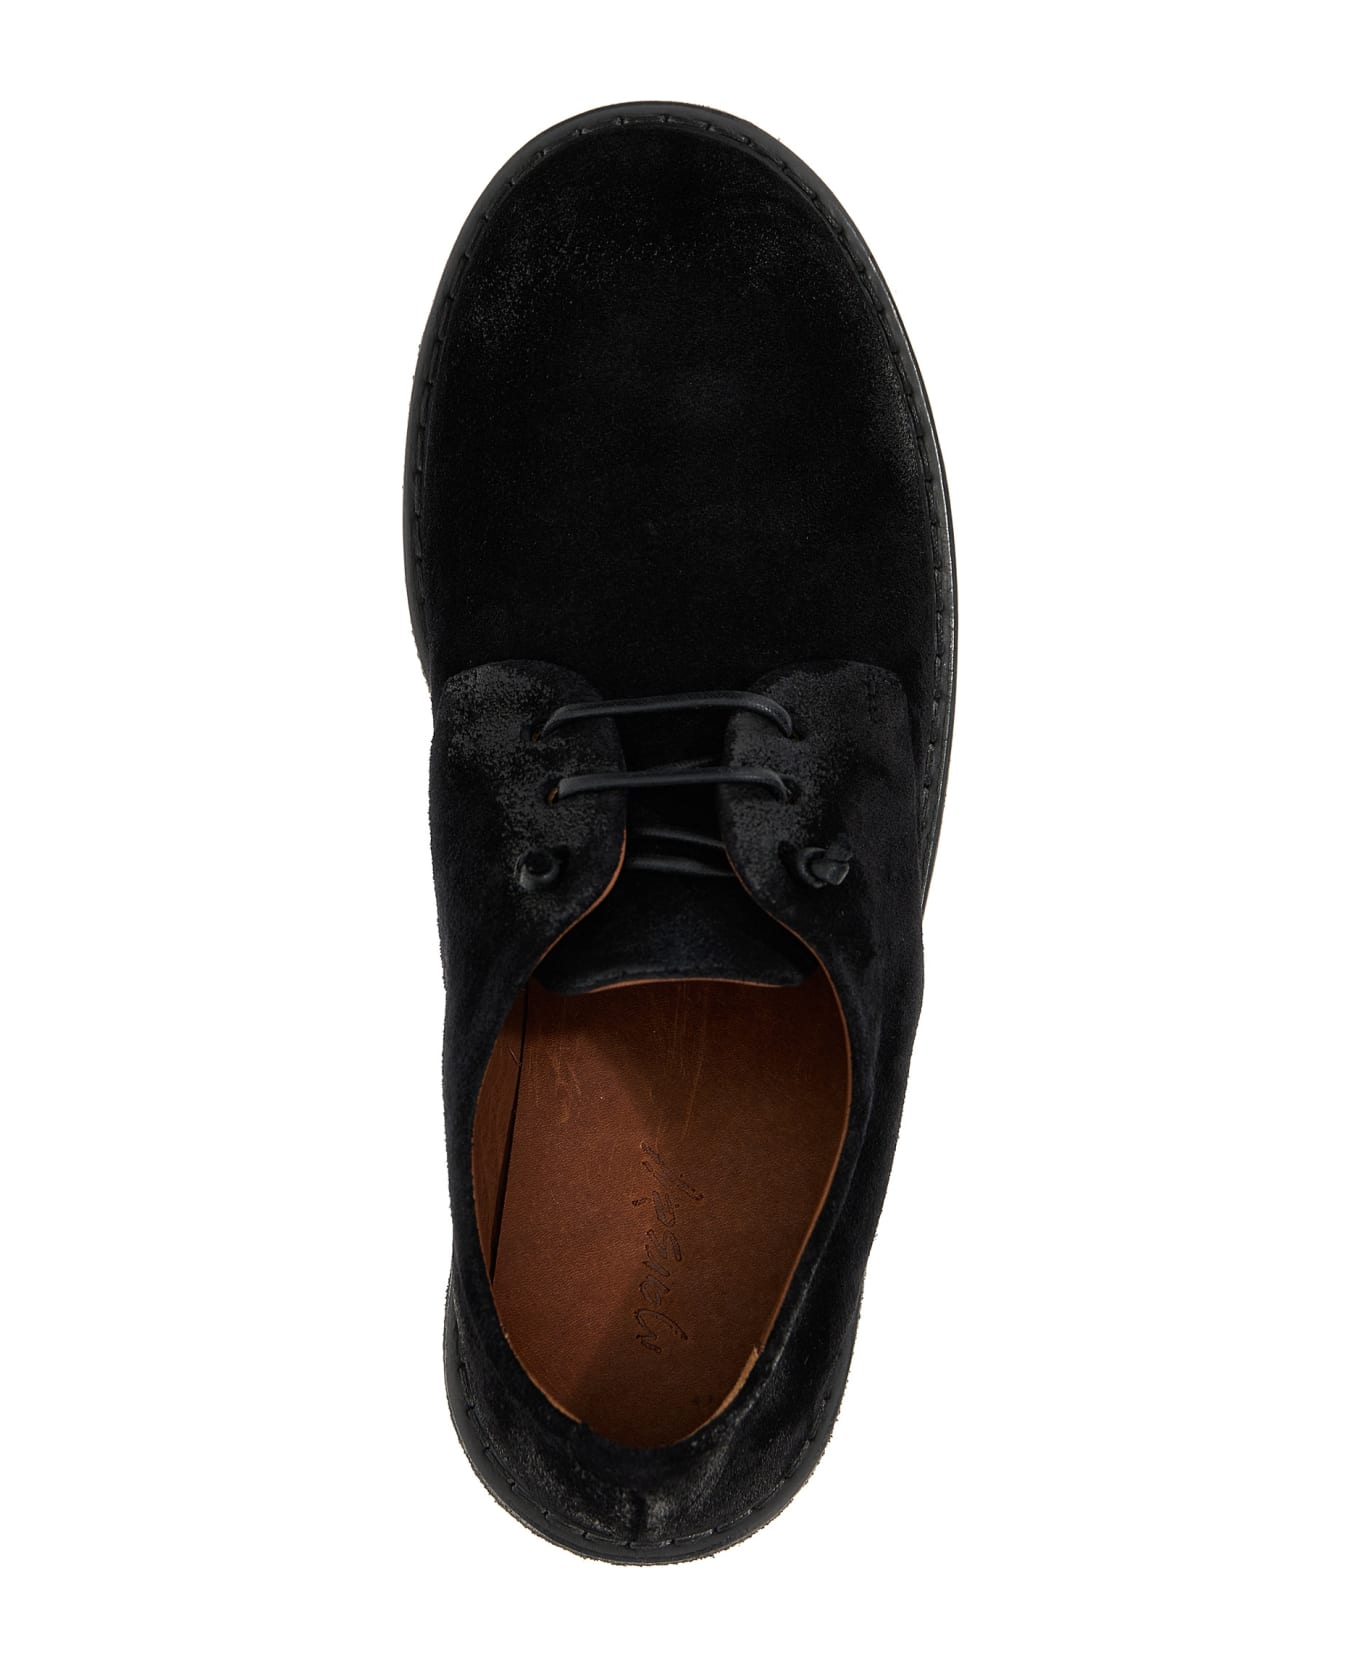 Marsell Parrucca Derby Shoes - Black  